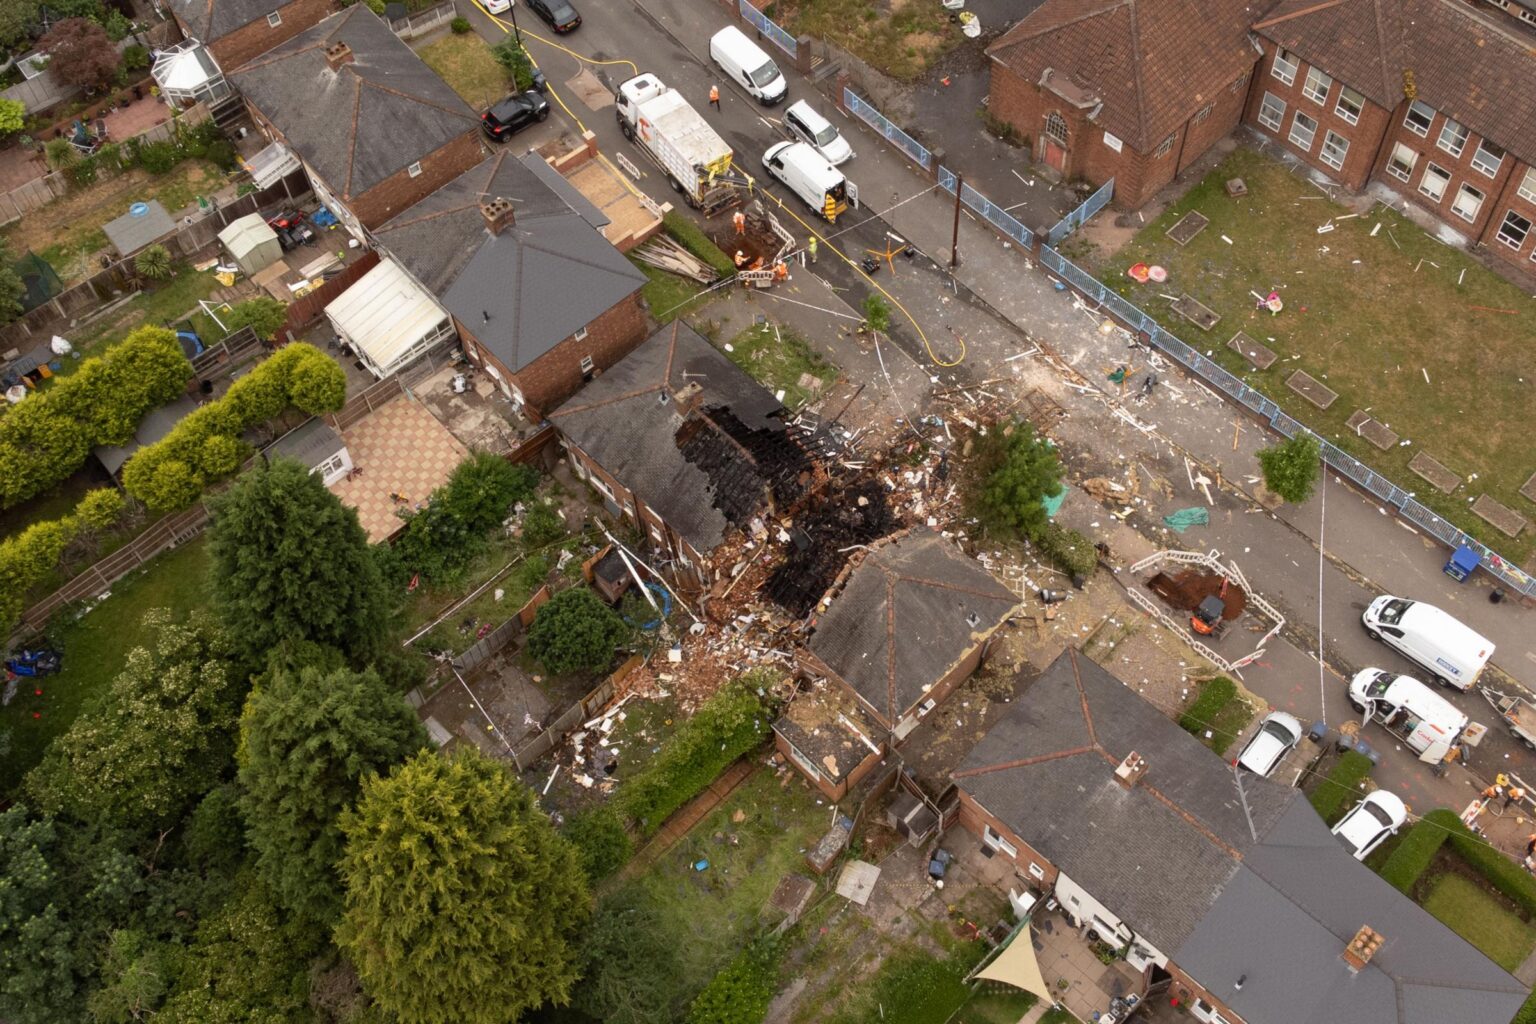 Birmingham explosion: Heroic neighbours free trapped man after blast so strong it ‘blew clothes off’